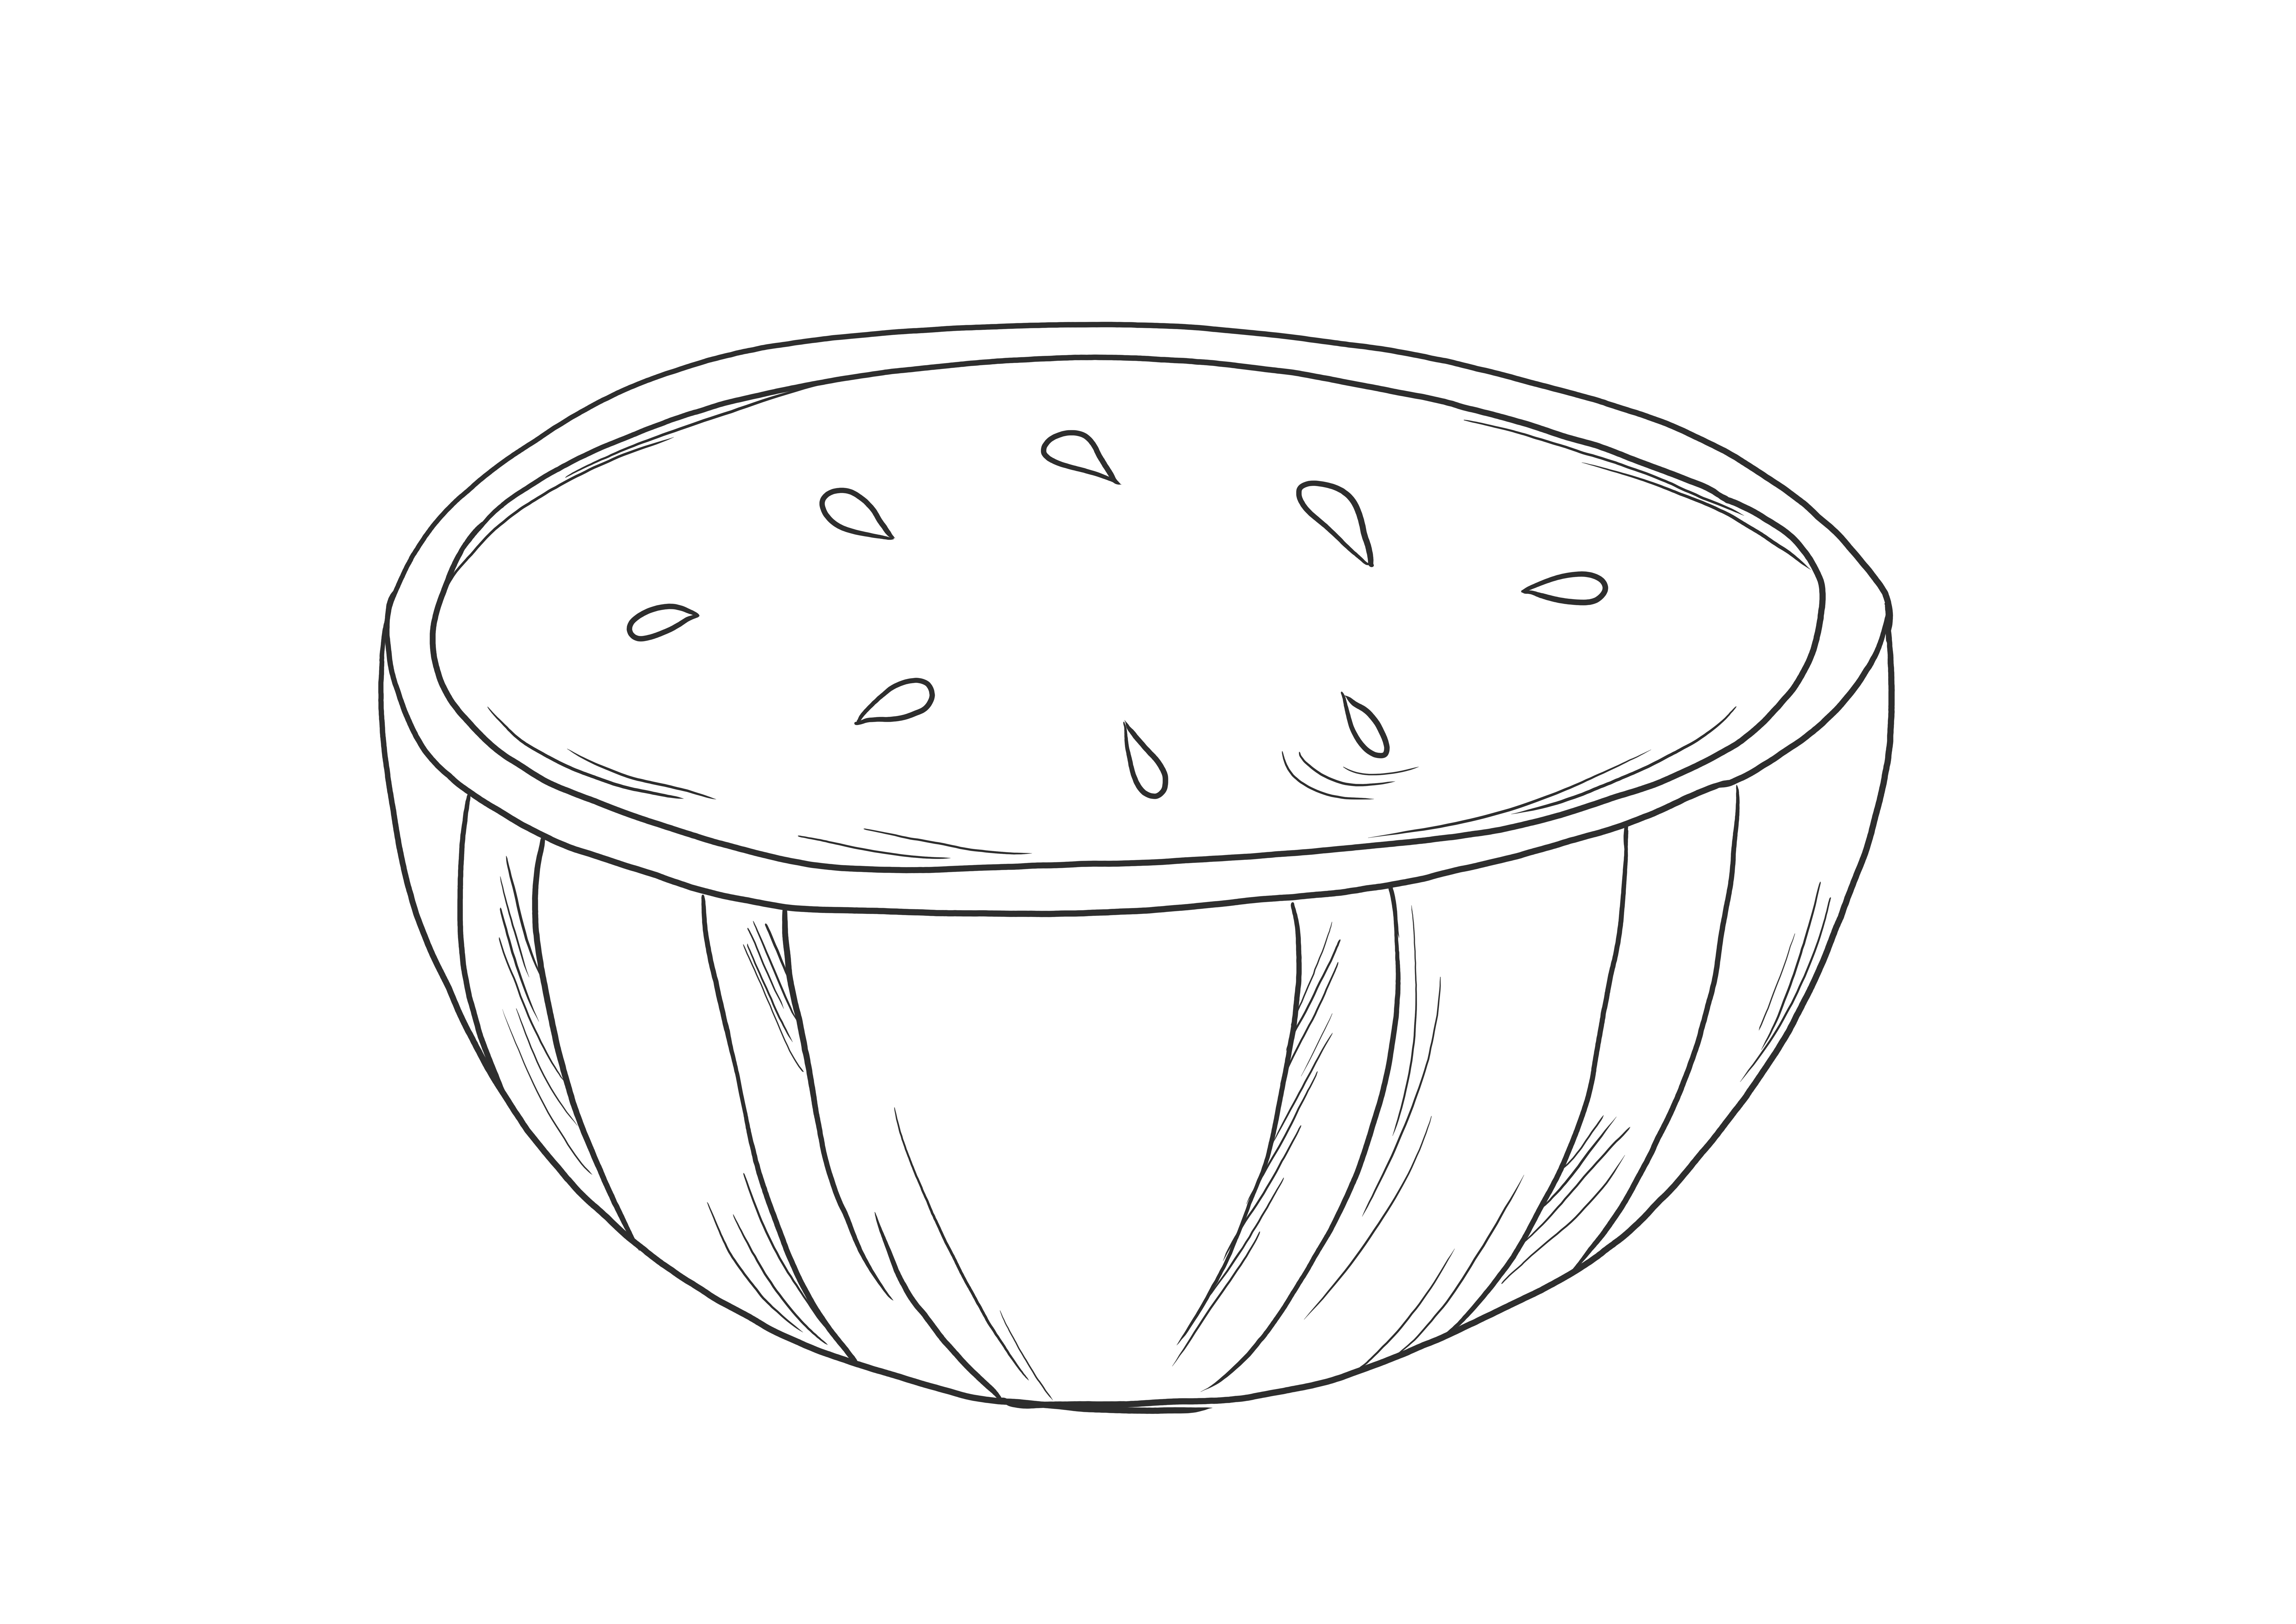 A coloring sheet of half of a watermelon free printing and coloring